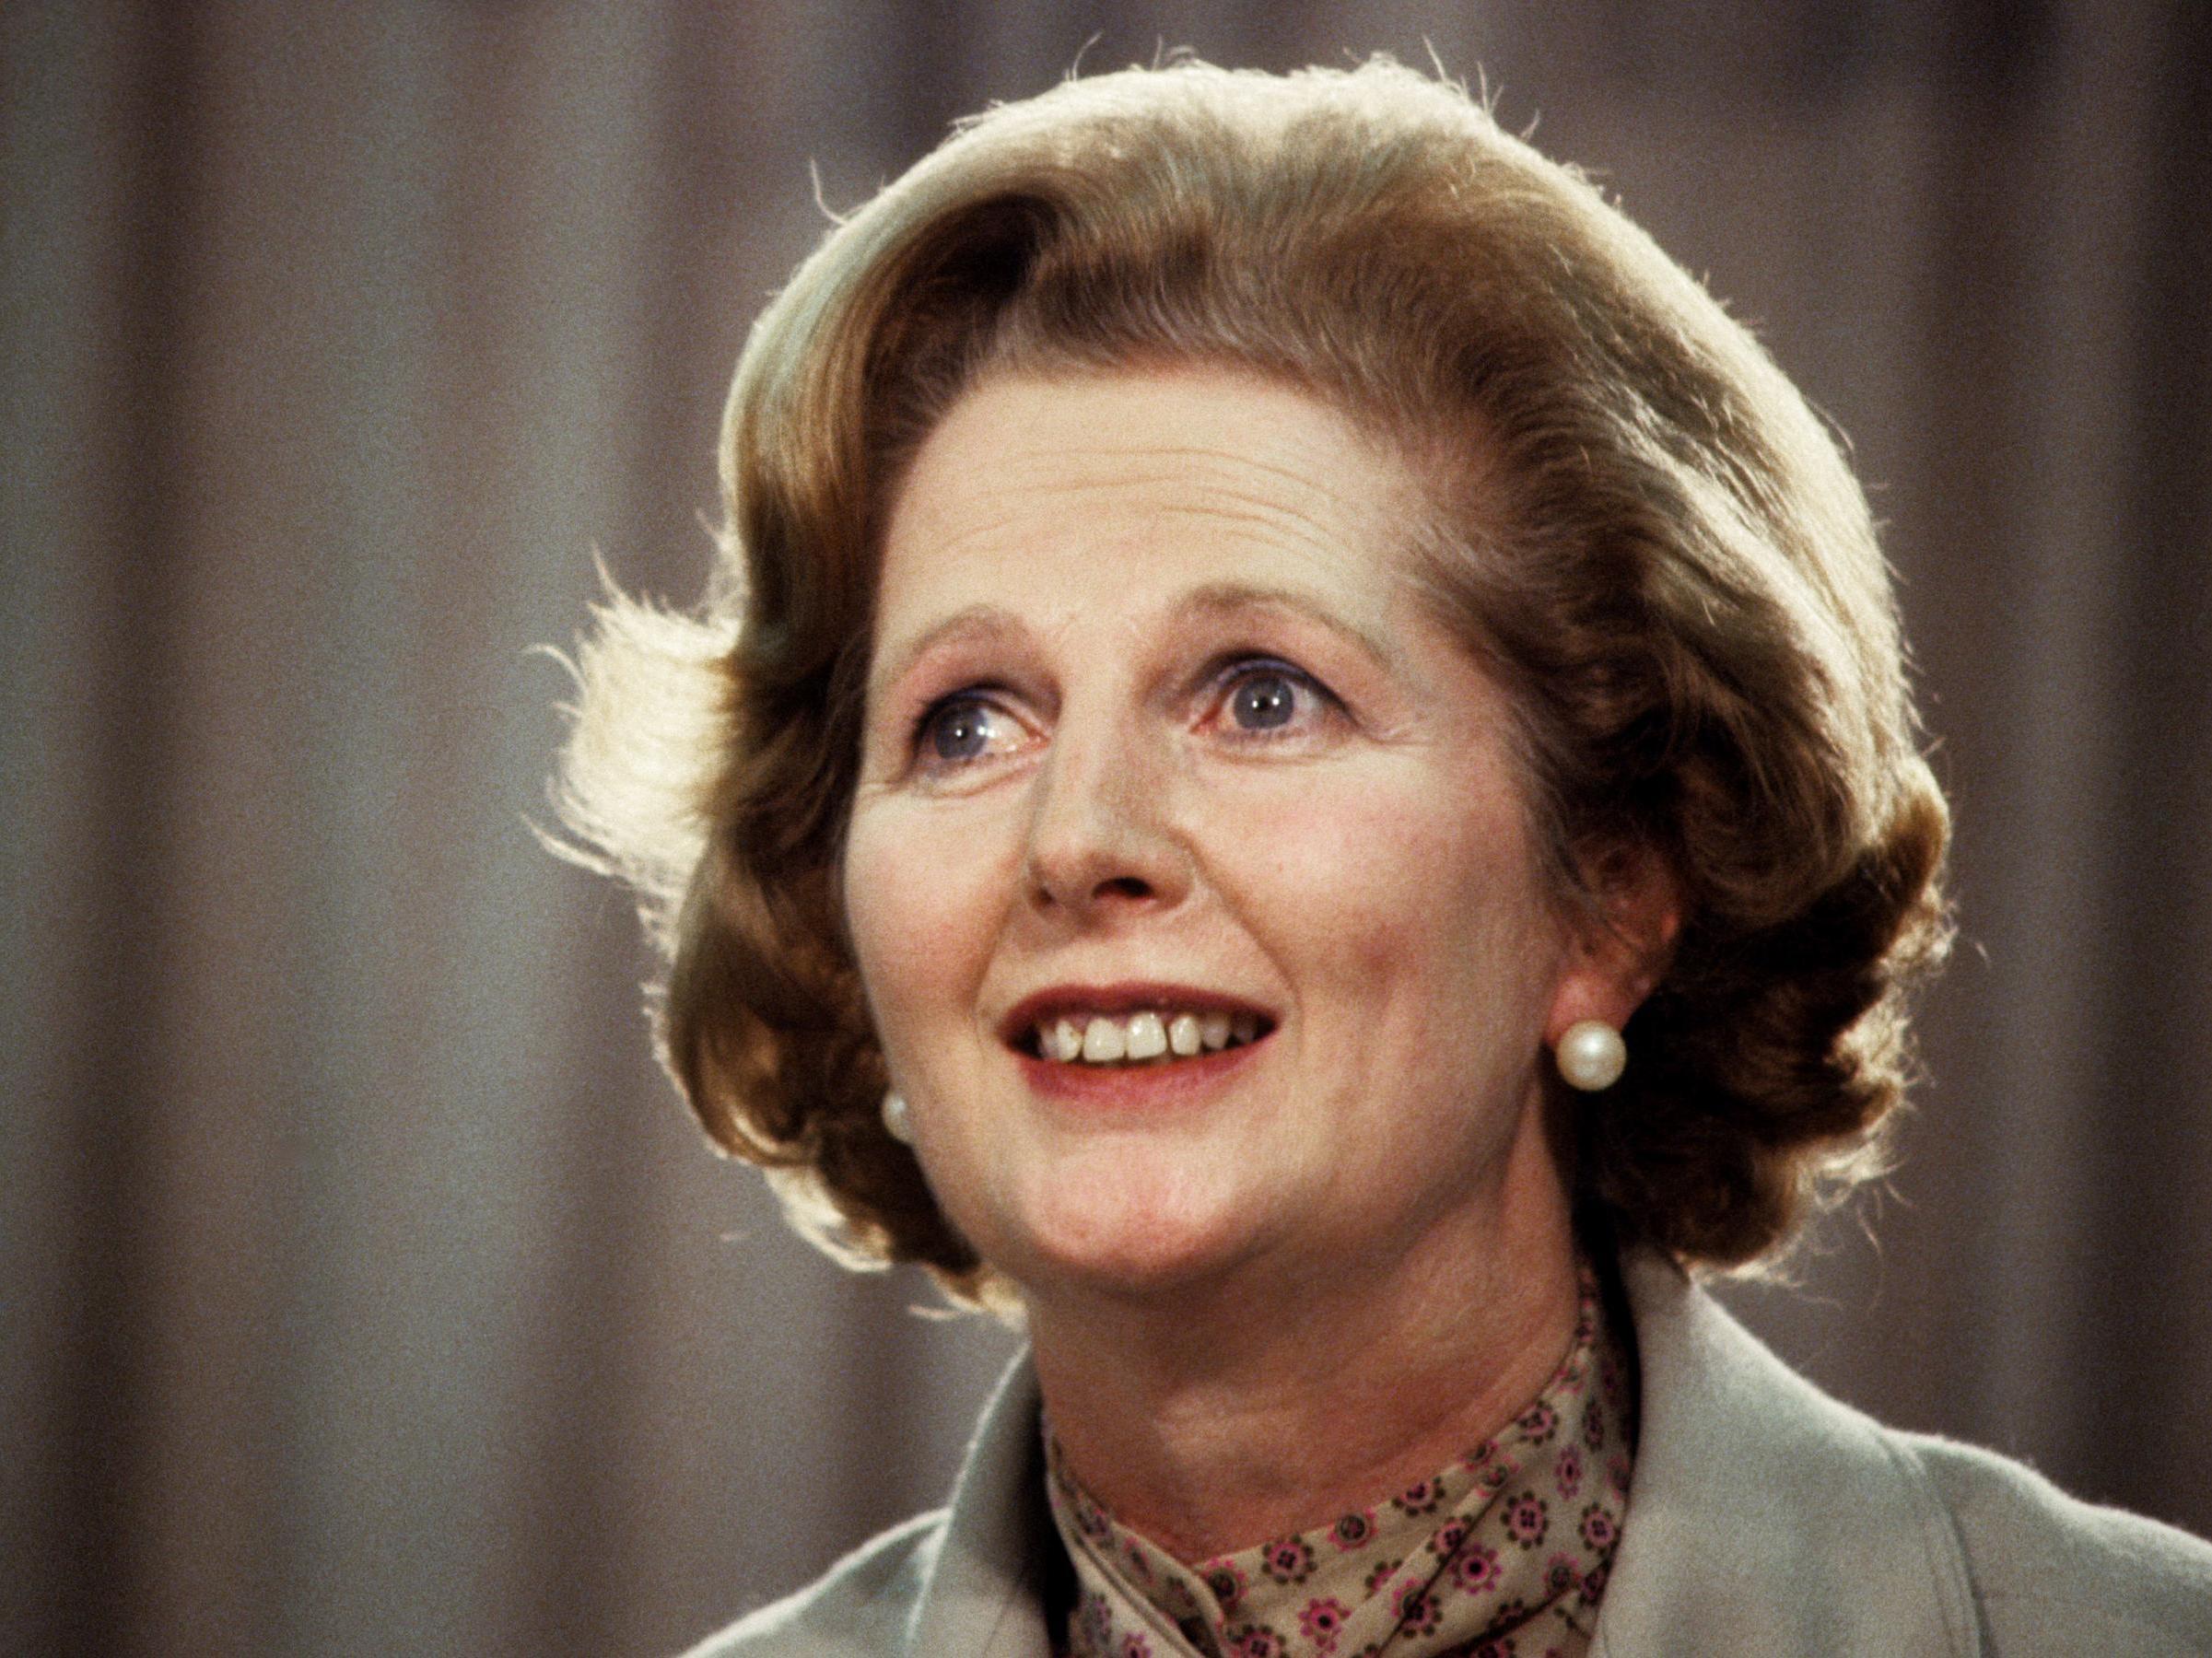 Margaret Thatcher briefly worked as a chemist at the food company J Lyons and Co before becoming an MP